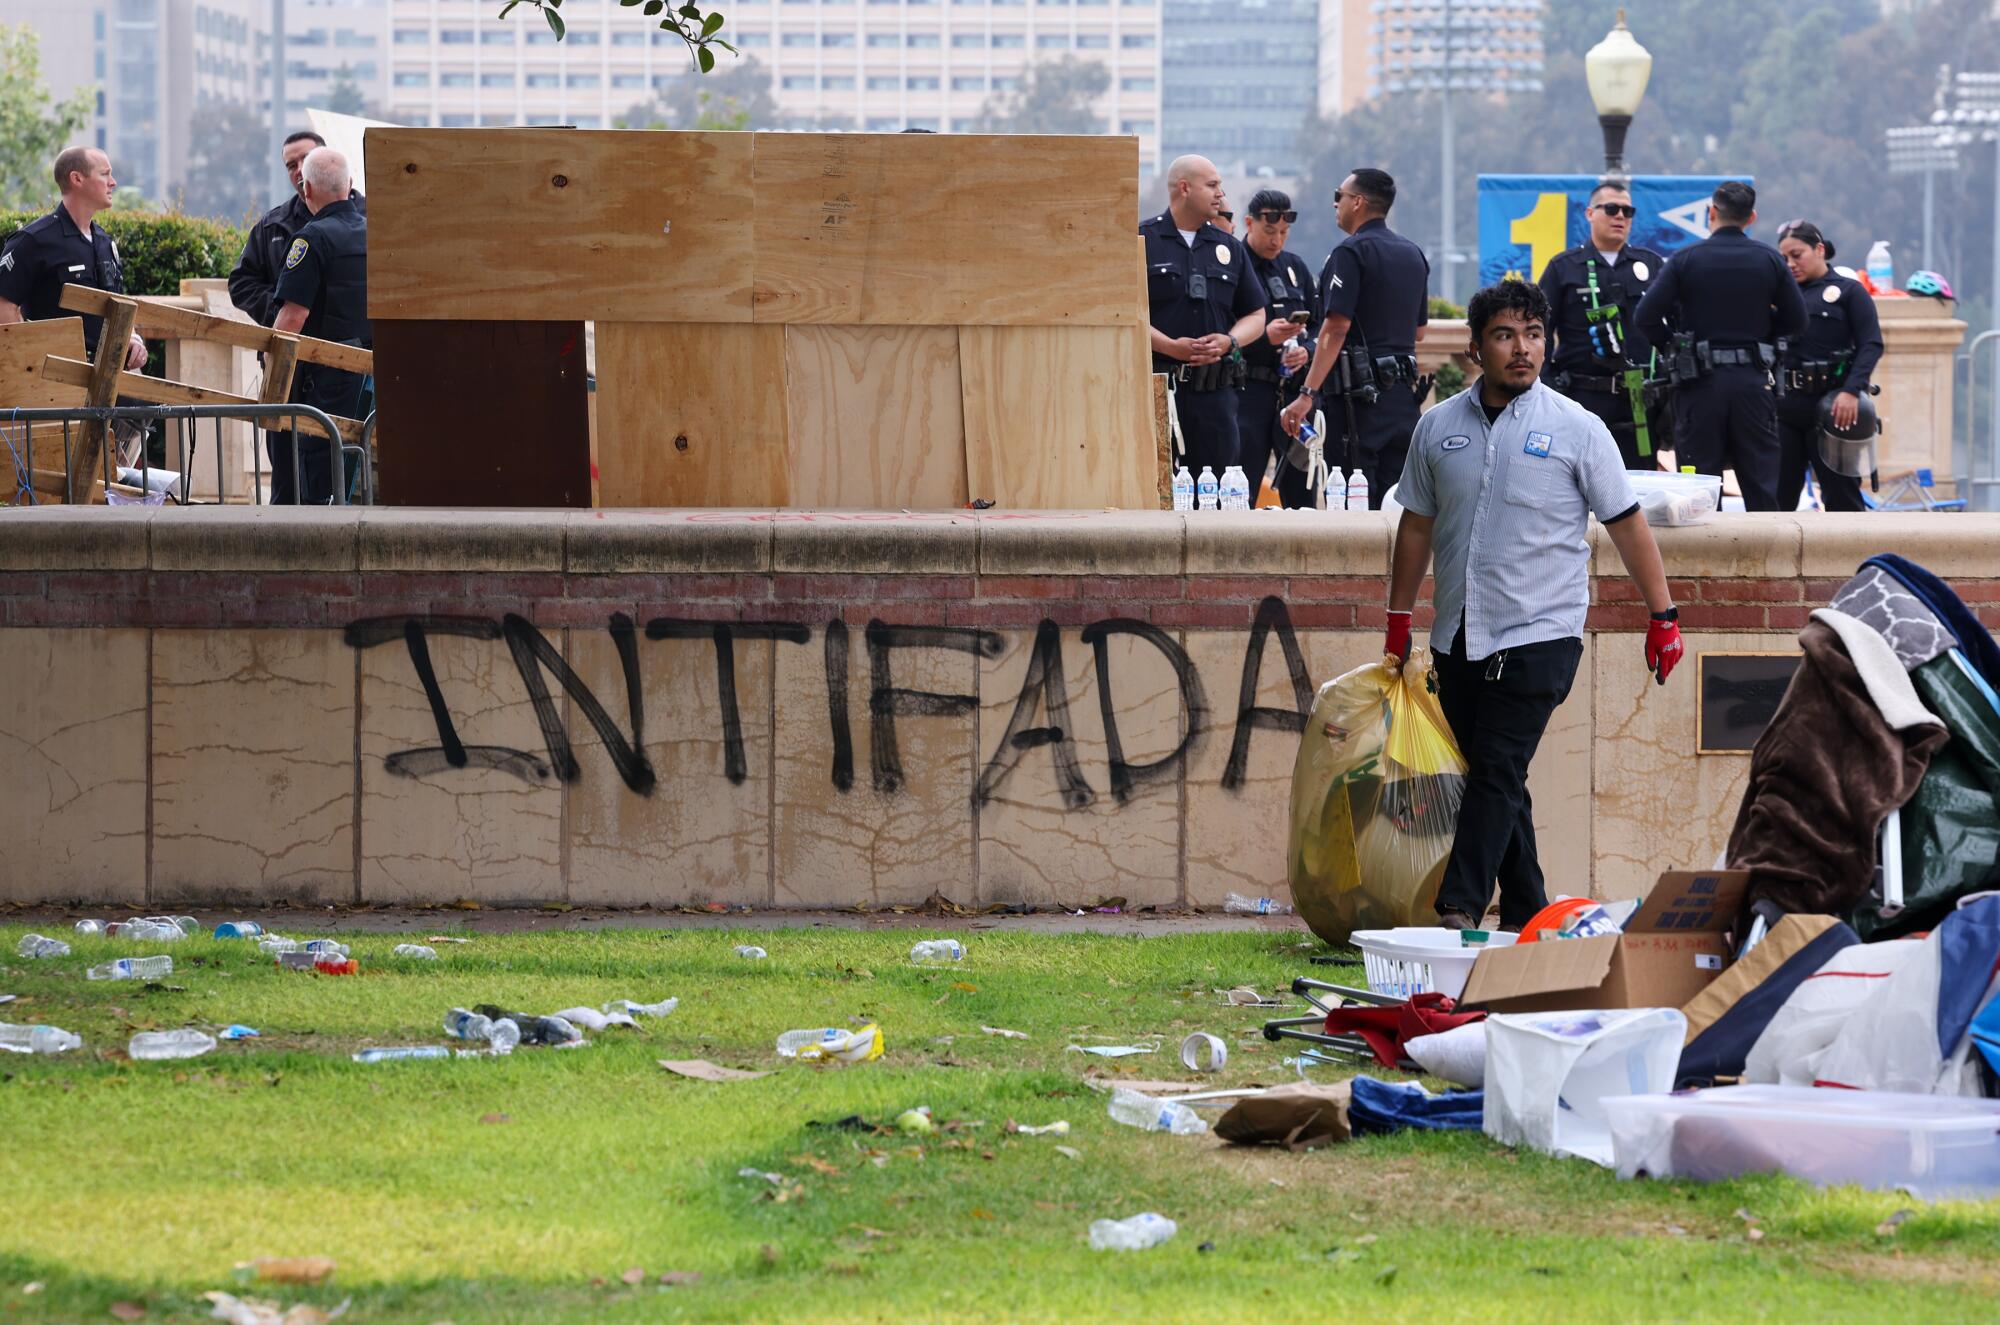 A UCLA worker carrying a large bag, with police officers in the background and the word "Intifada" scrawled on a barrier